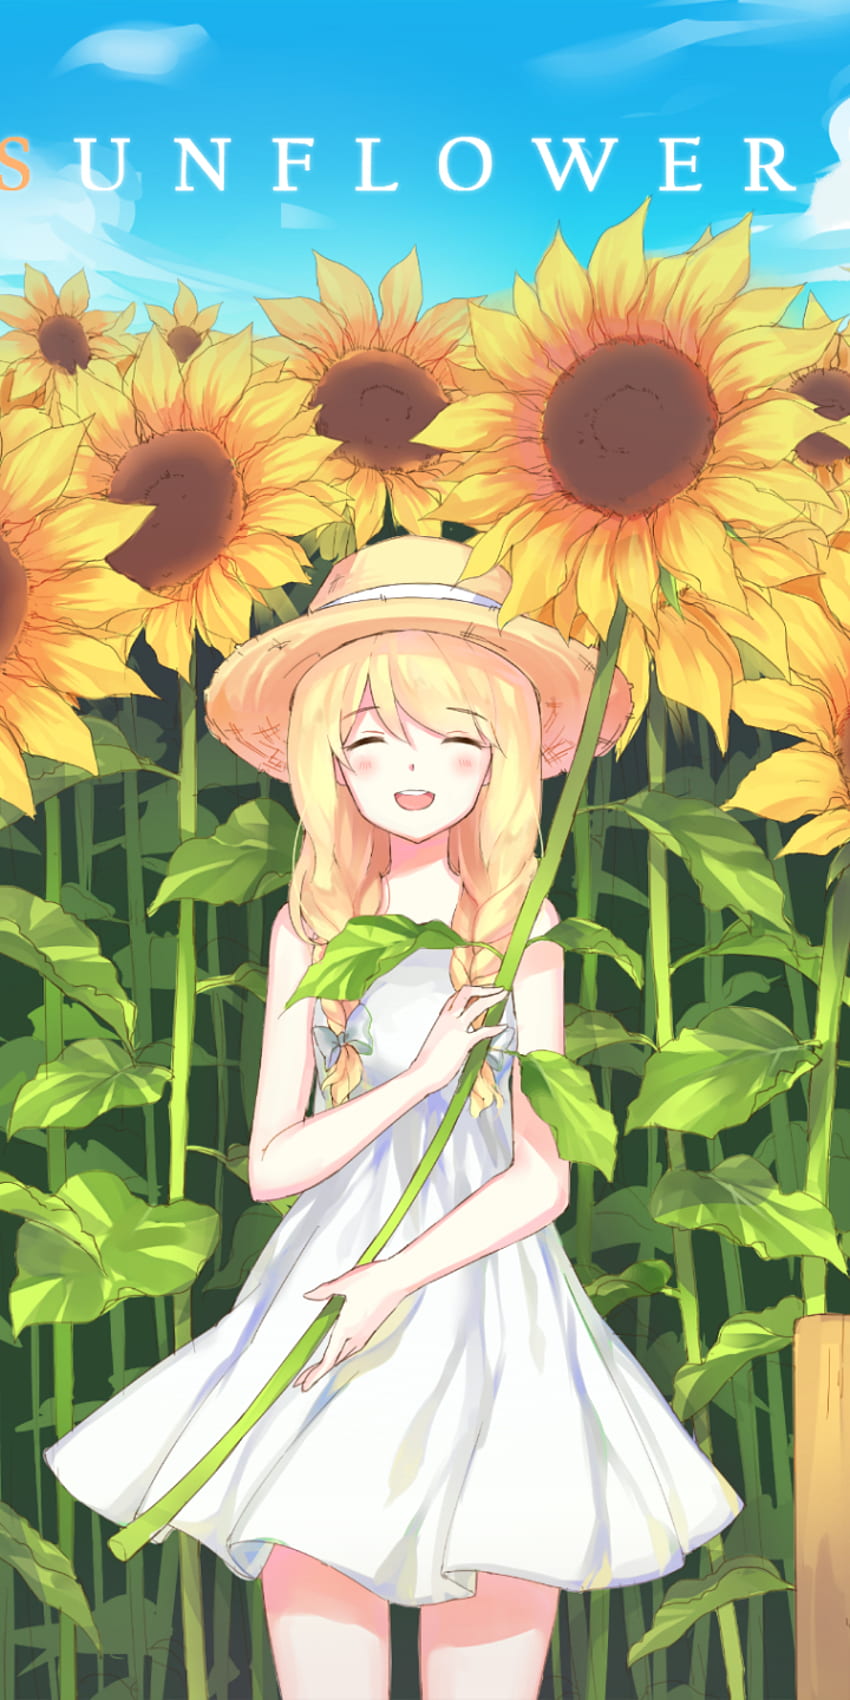 Save 65% on Himawari - The Sunflower - on Steam